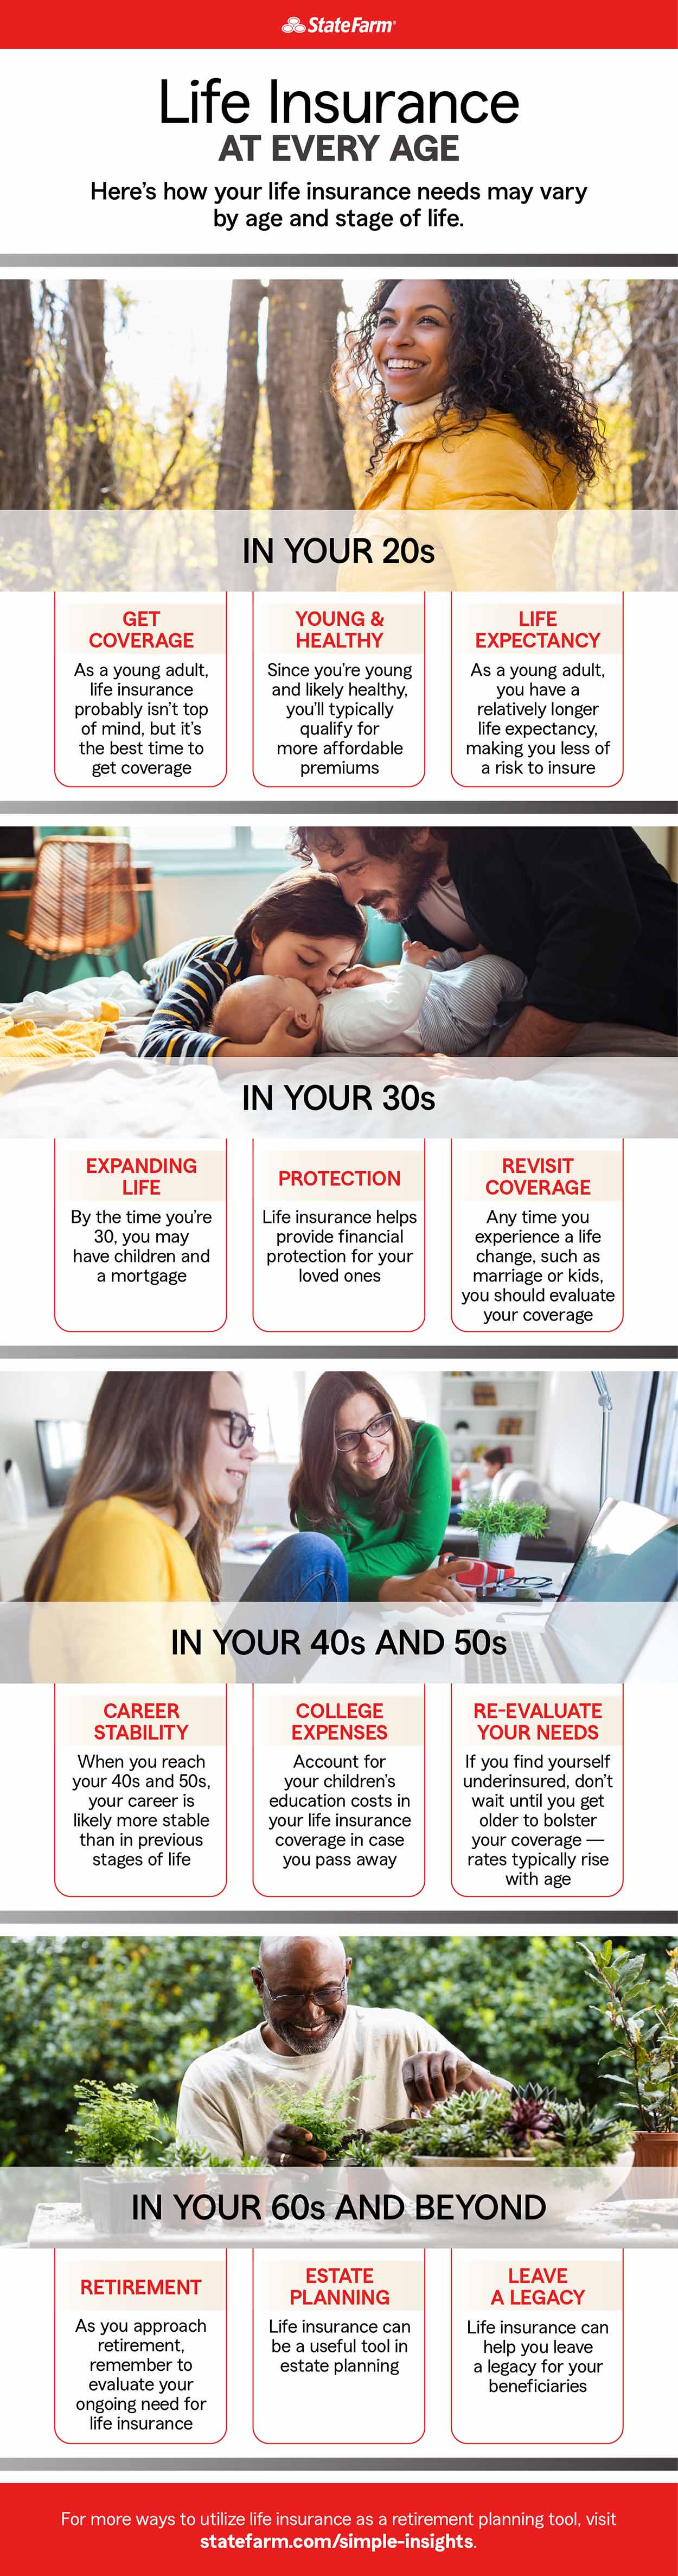 What age to get life insurance